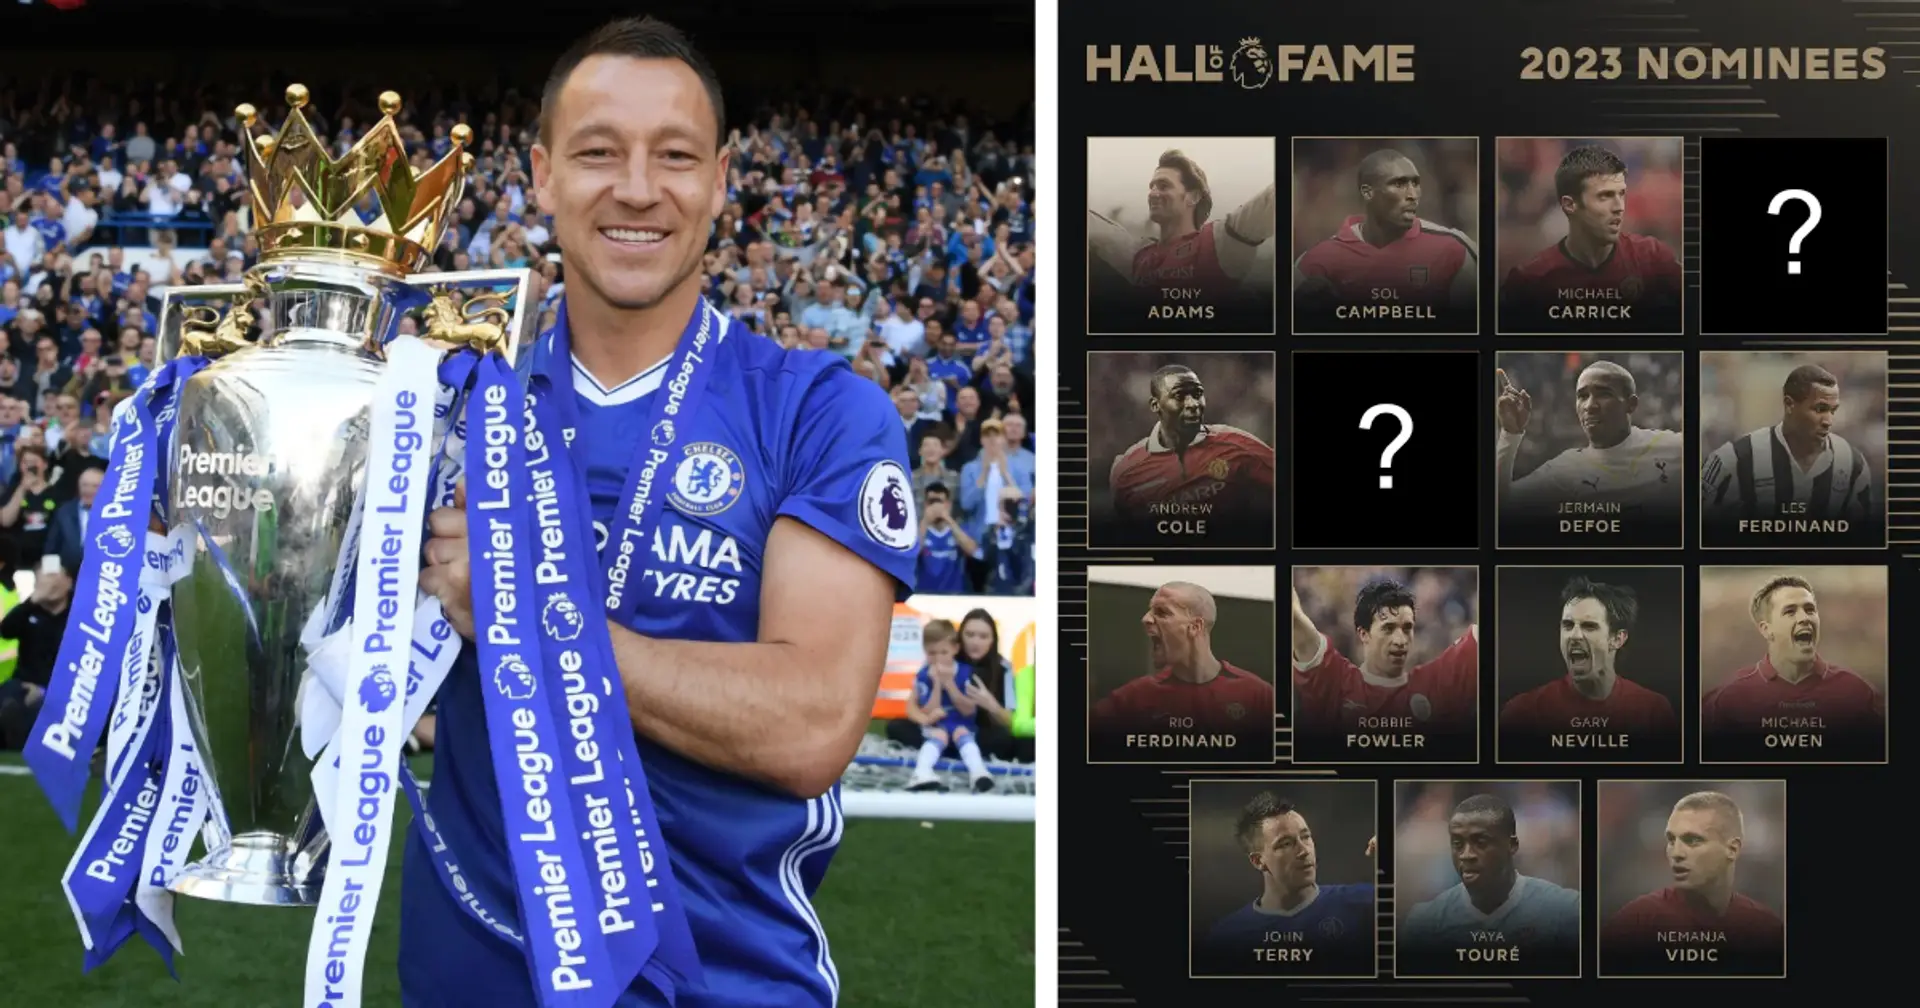 Three Chelsea legends shortlisted for Premier League Hall of Fame - one is John Terry